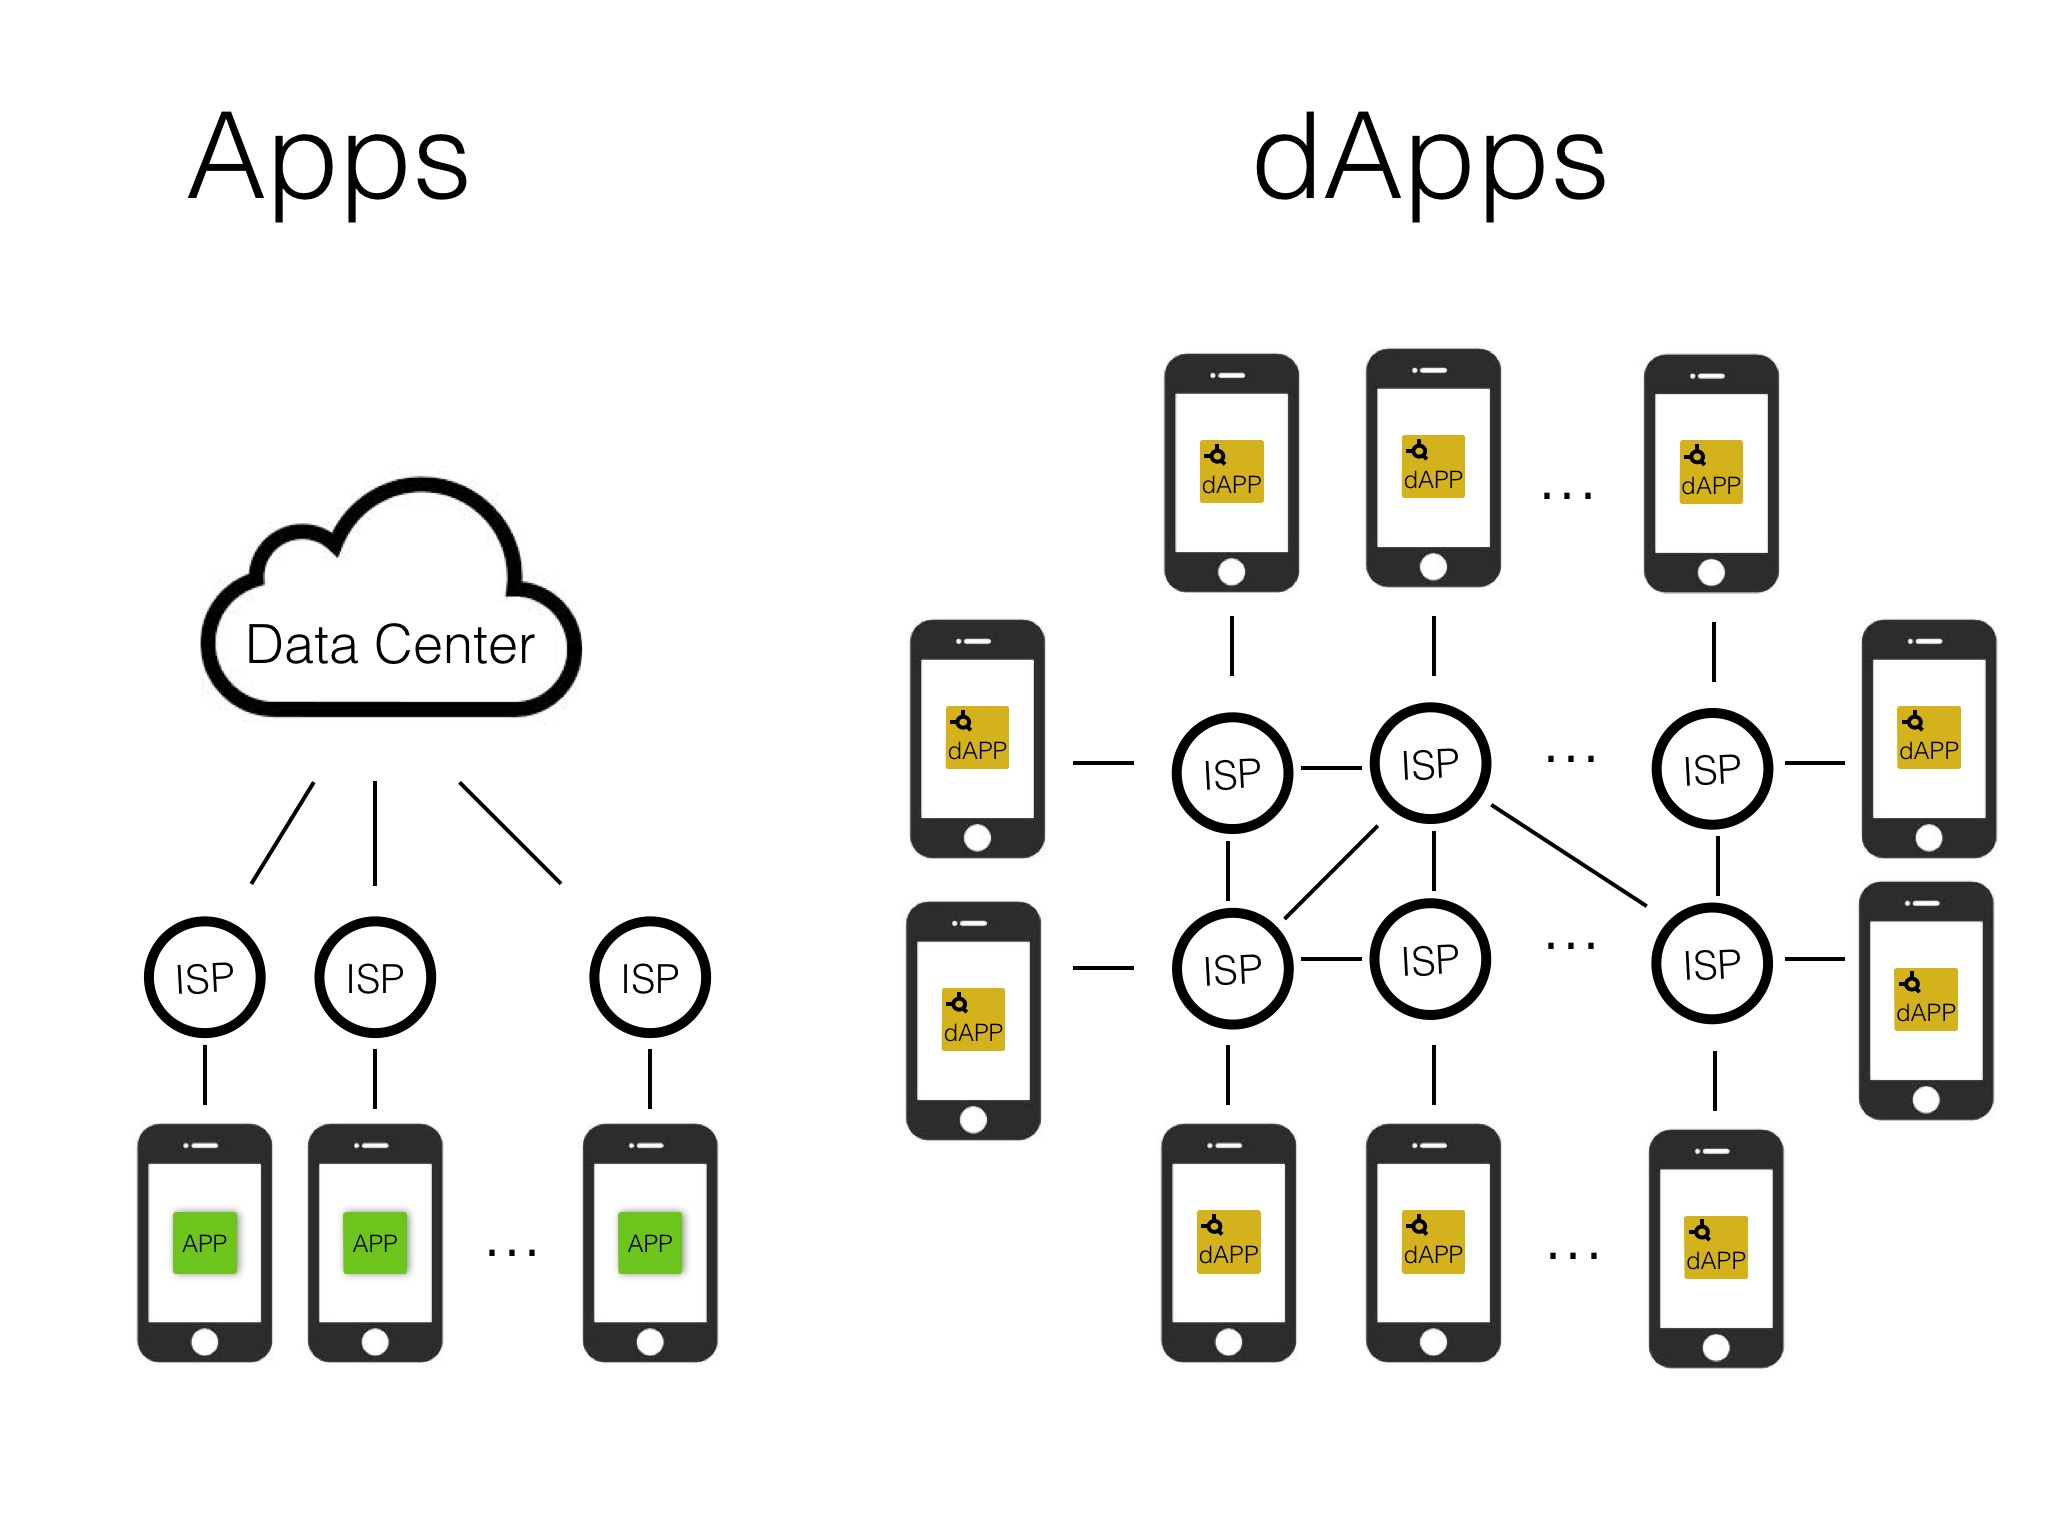 Diagram comparing Apps with DApps